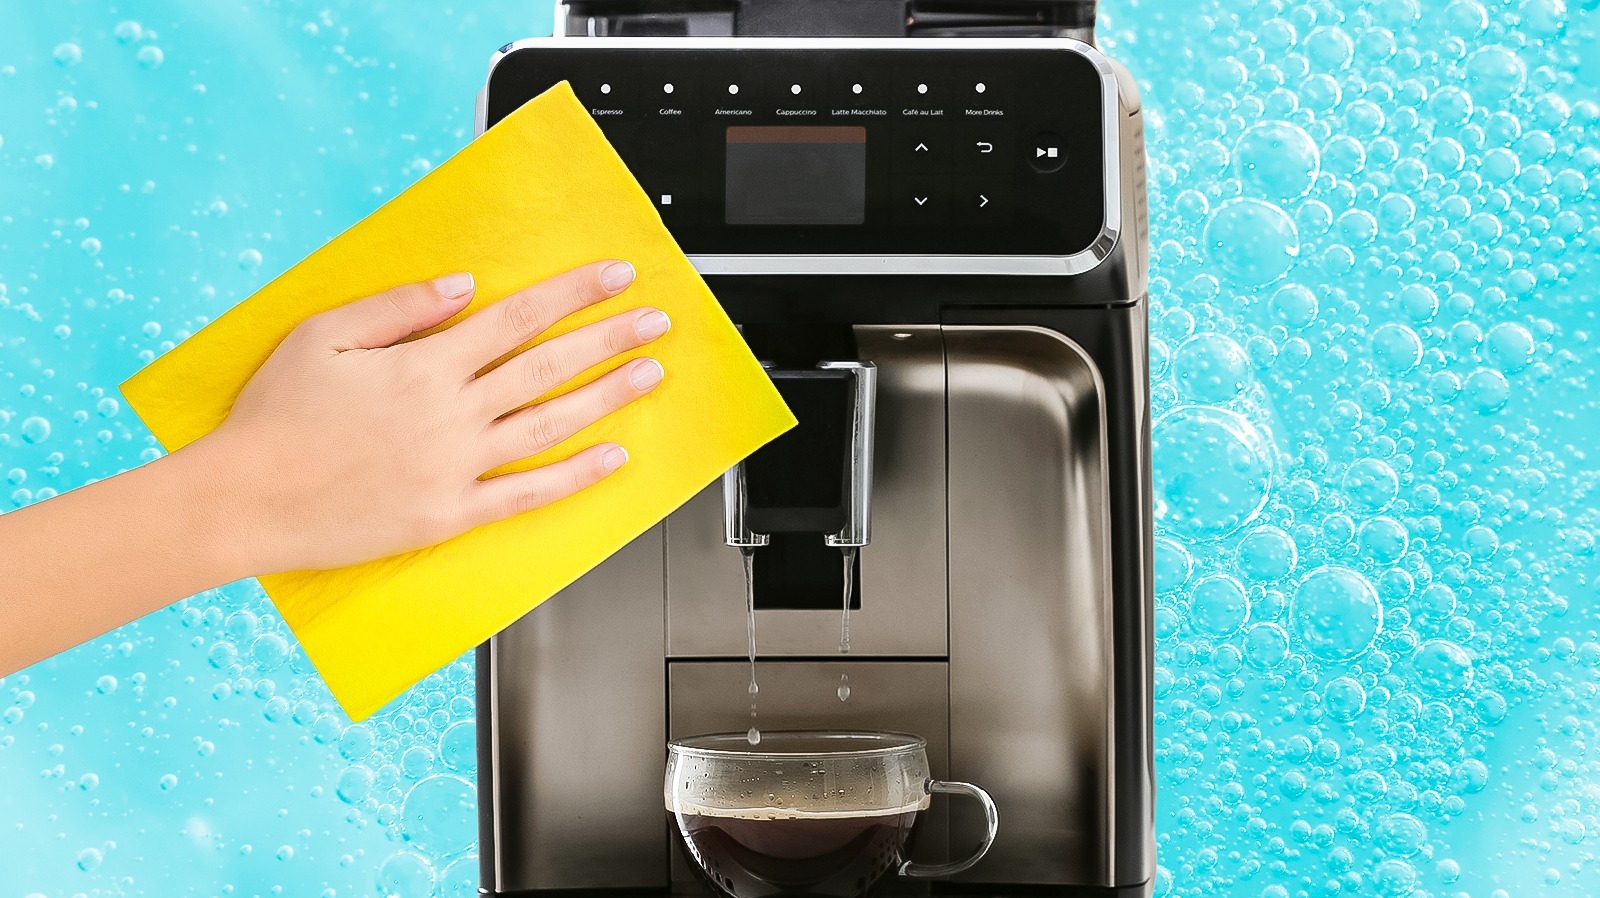 https://www.tastingtable.com/img/gallery/12-tips-to-clean-your-coffee-maker/l-intro-1698086527.jpg